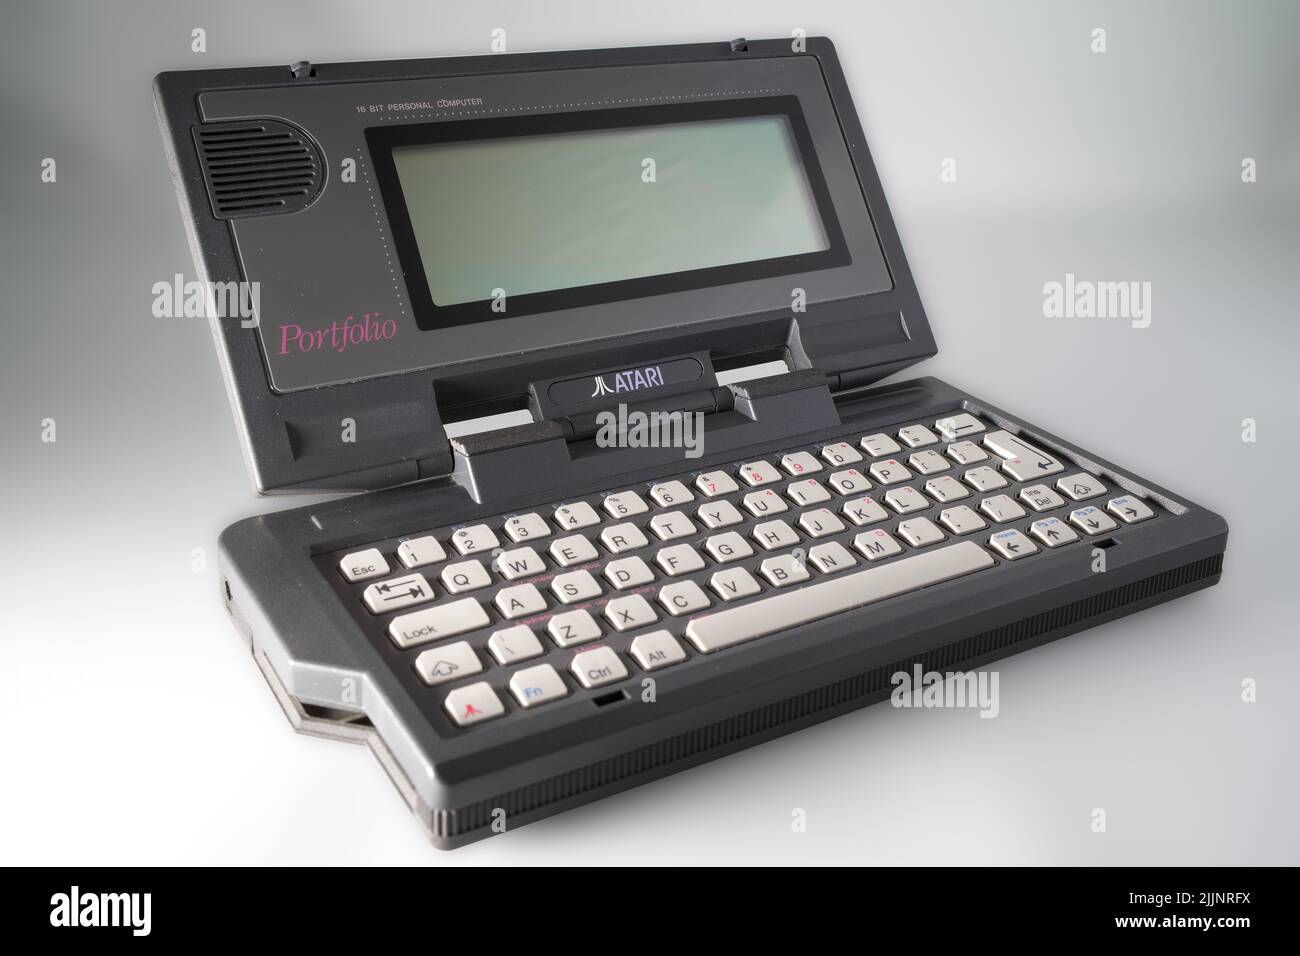 A closeup of an Atari Portfolio PDA or Palmtop isolated on a white background in London, UK Stock Photo